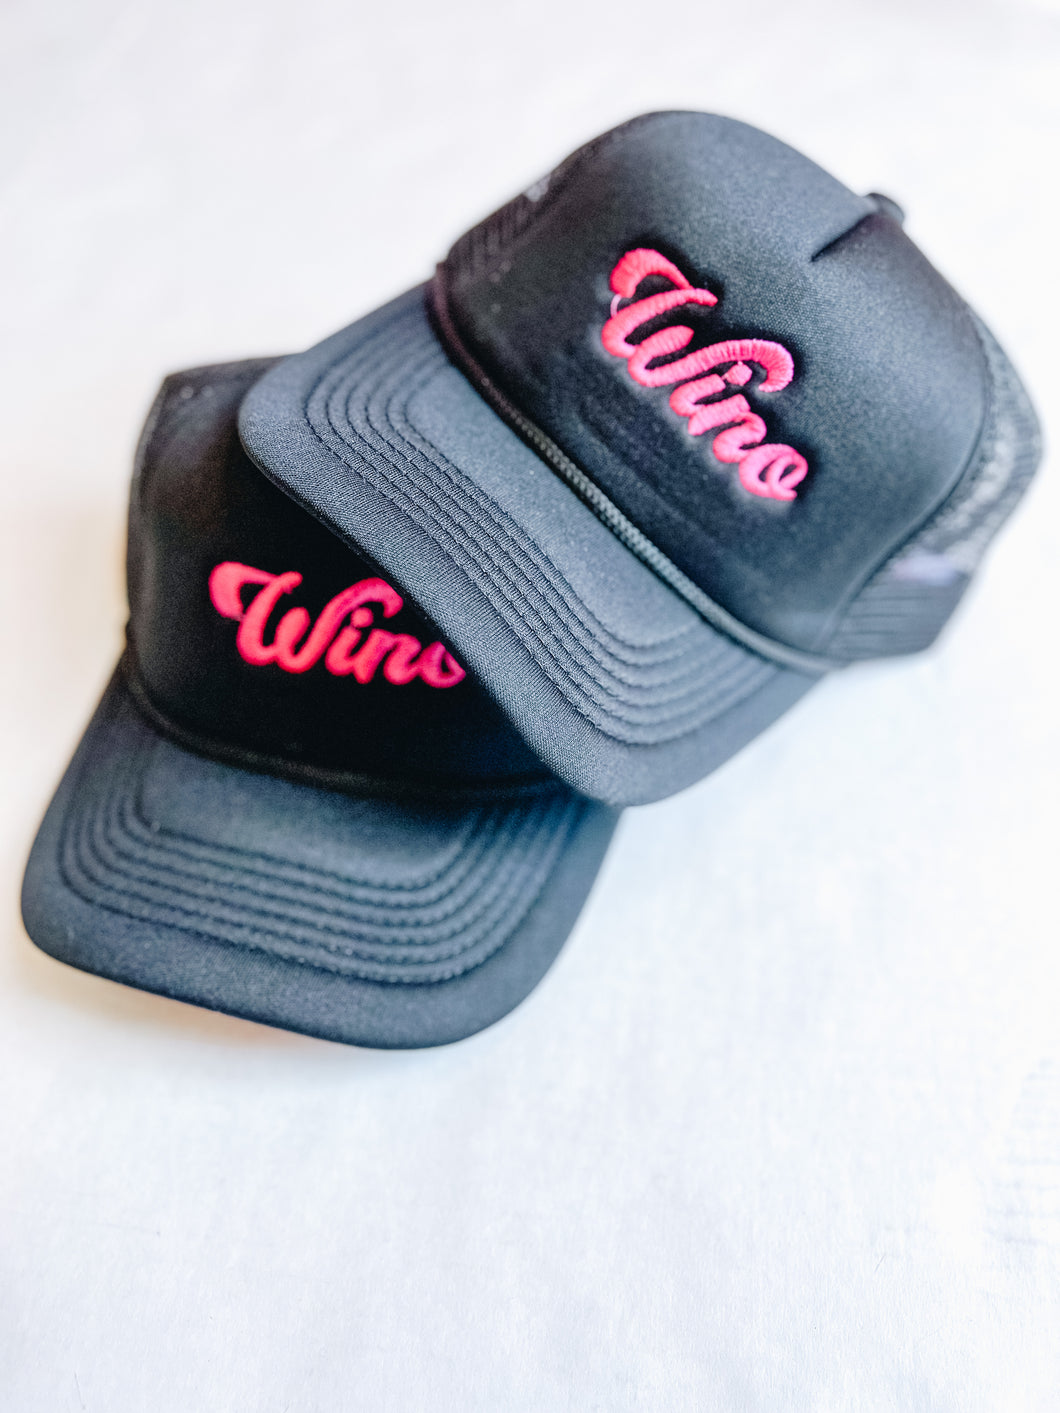 Mugsby - Wino Wine Lover Funny Trucker Style Hat